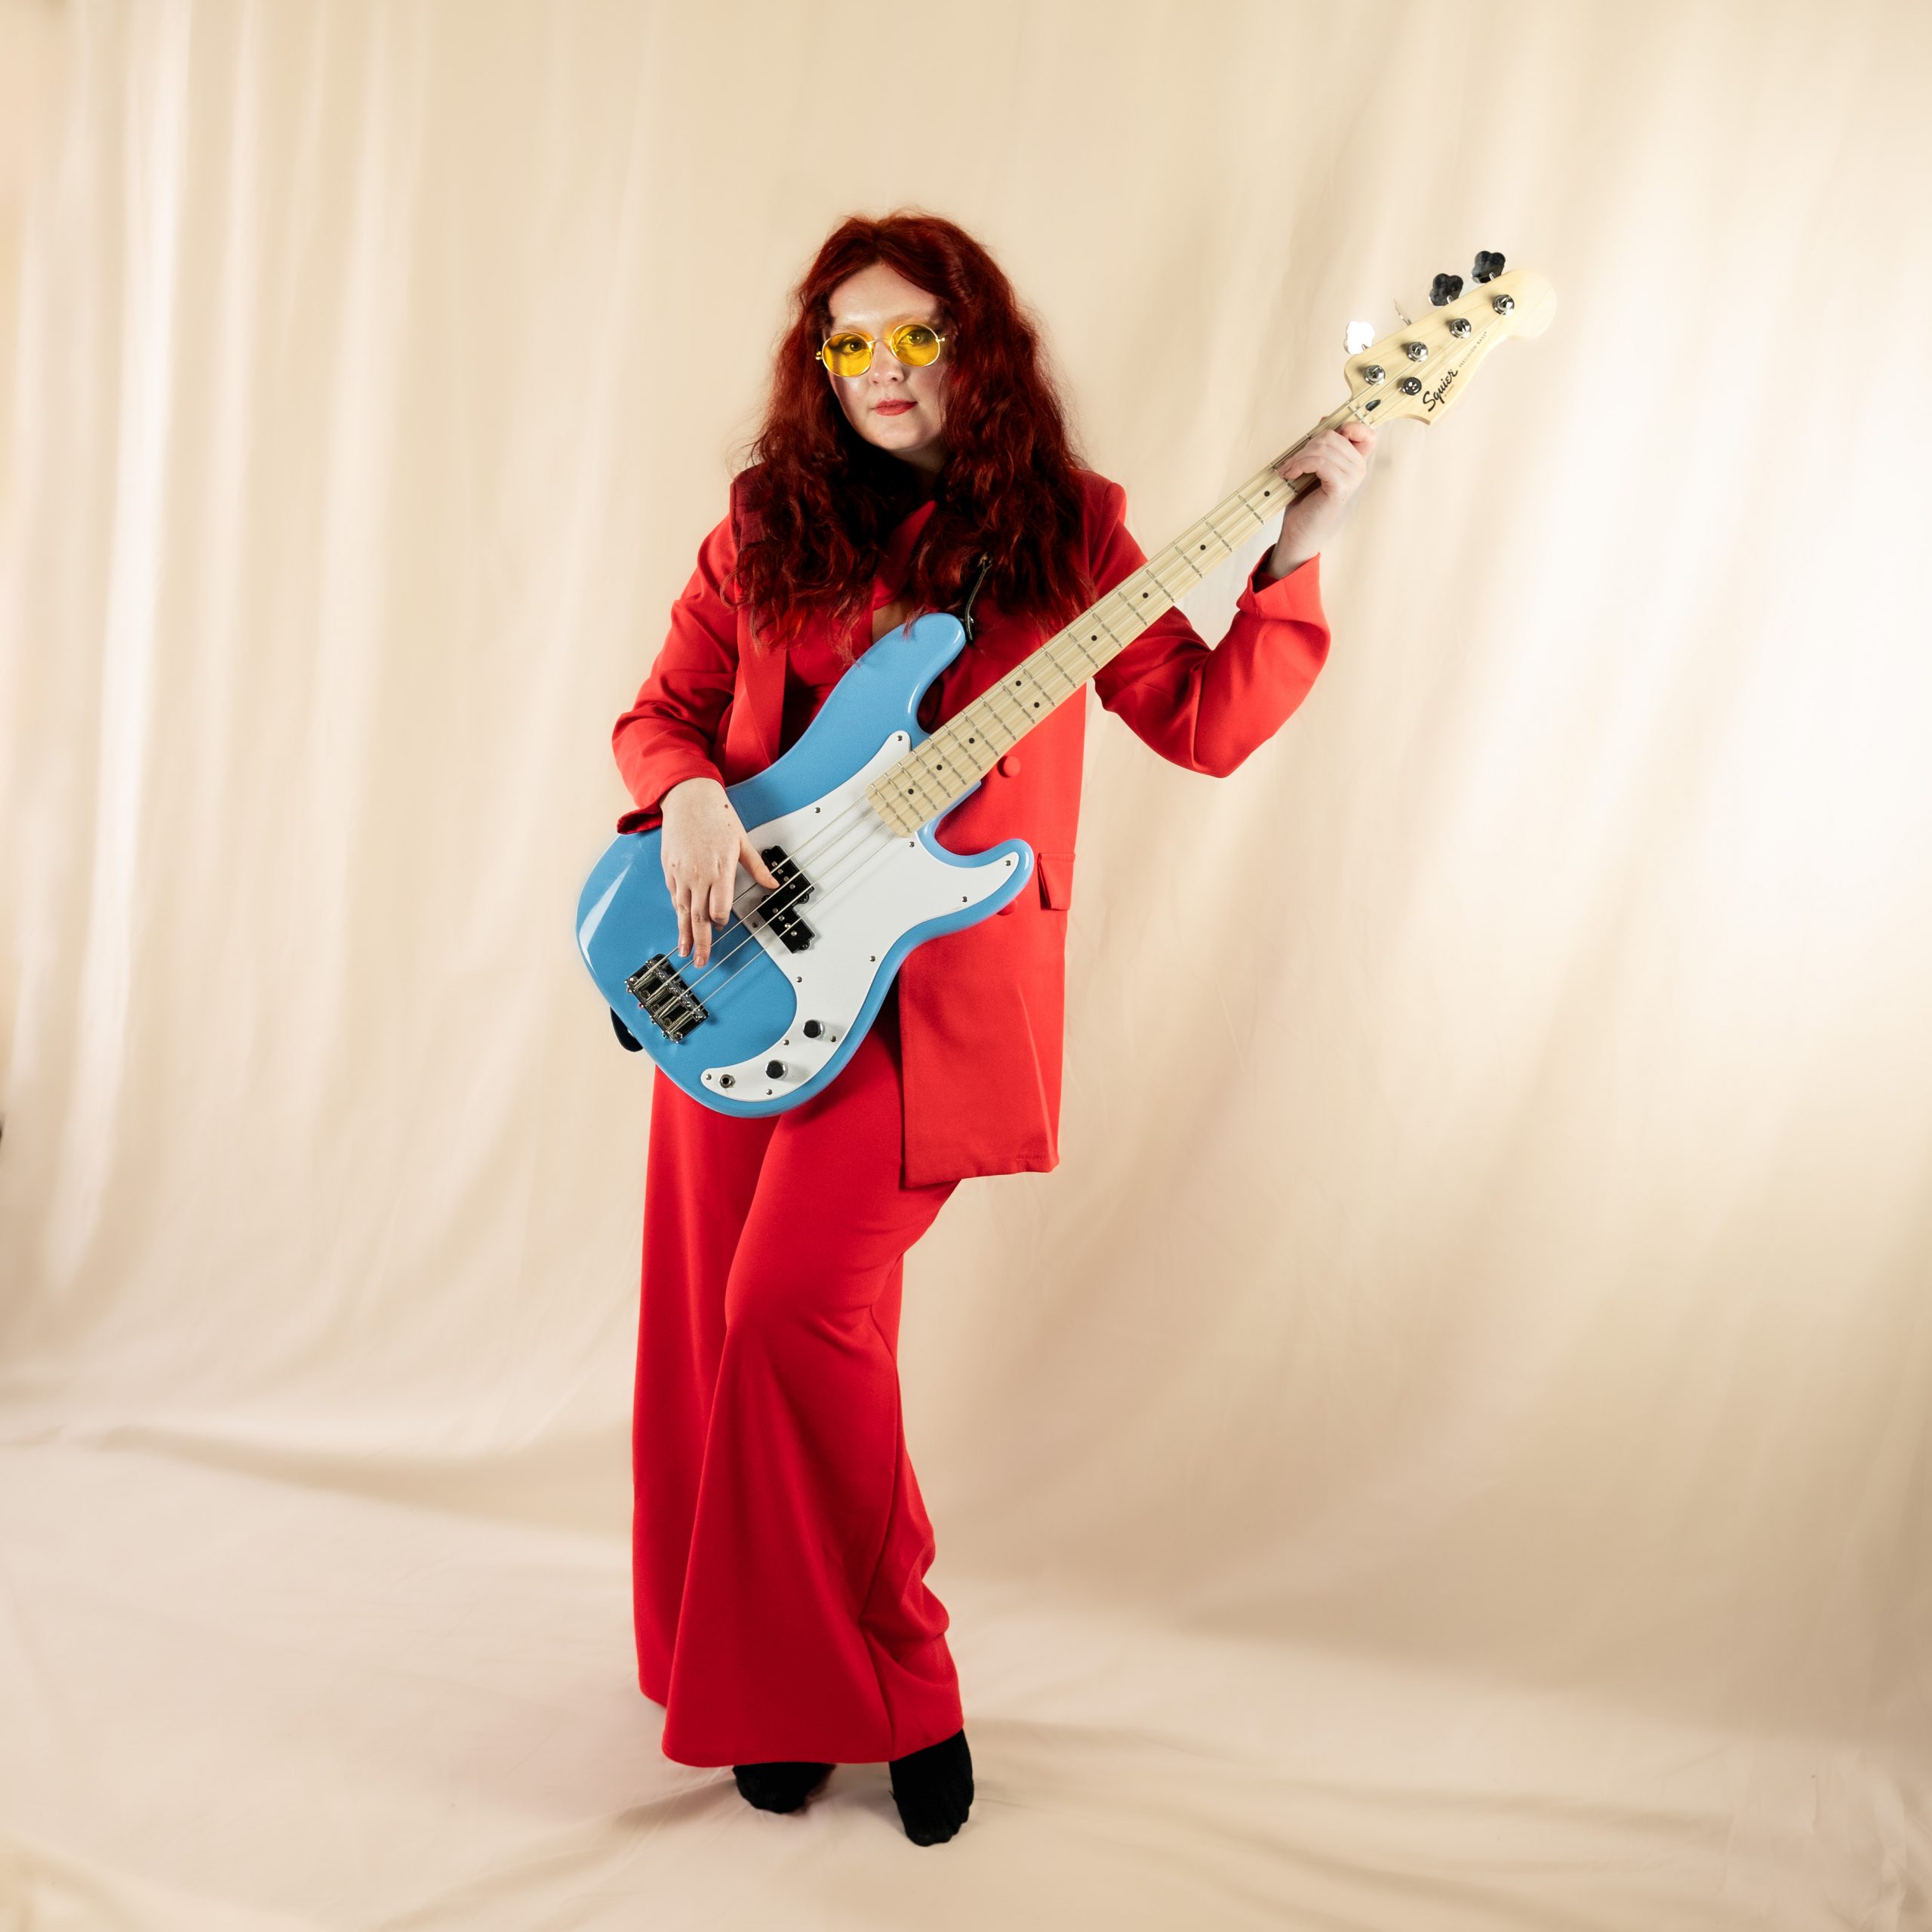 press shot of megan black, wearing a red top and pants, playing bass